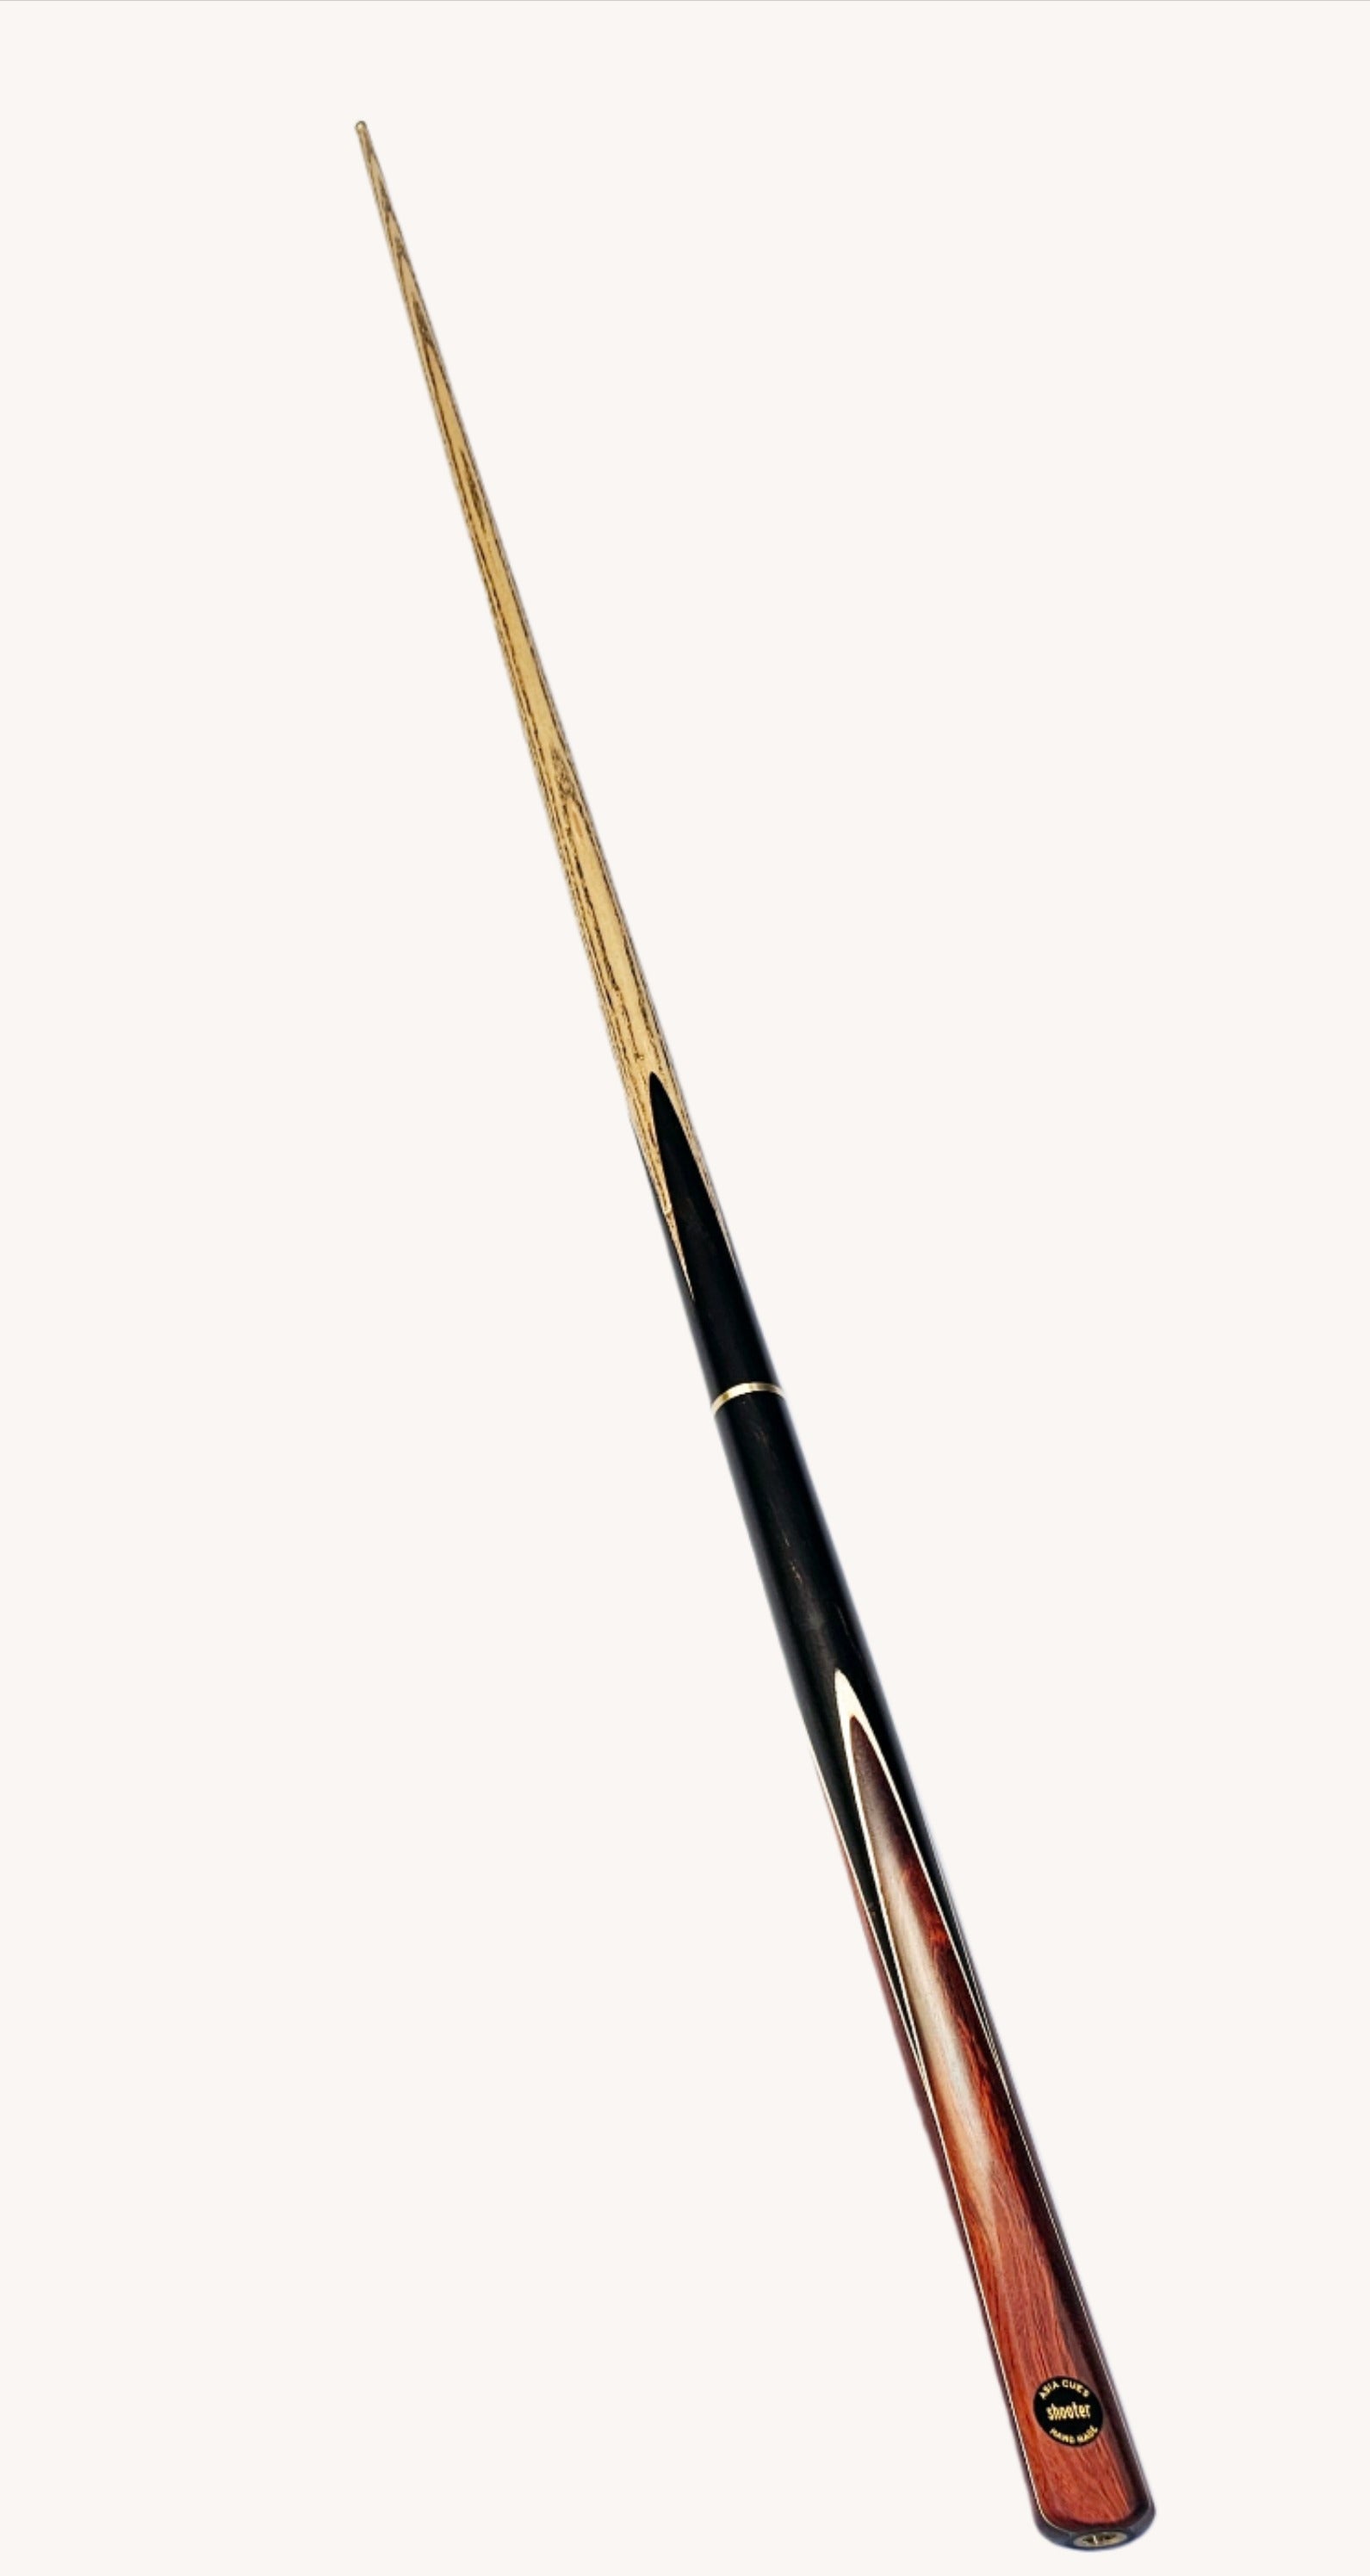 Asia Cues Shooter - 3/4 Jointed Pool Cue 8.4mm Tip, 17oz, 58"